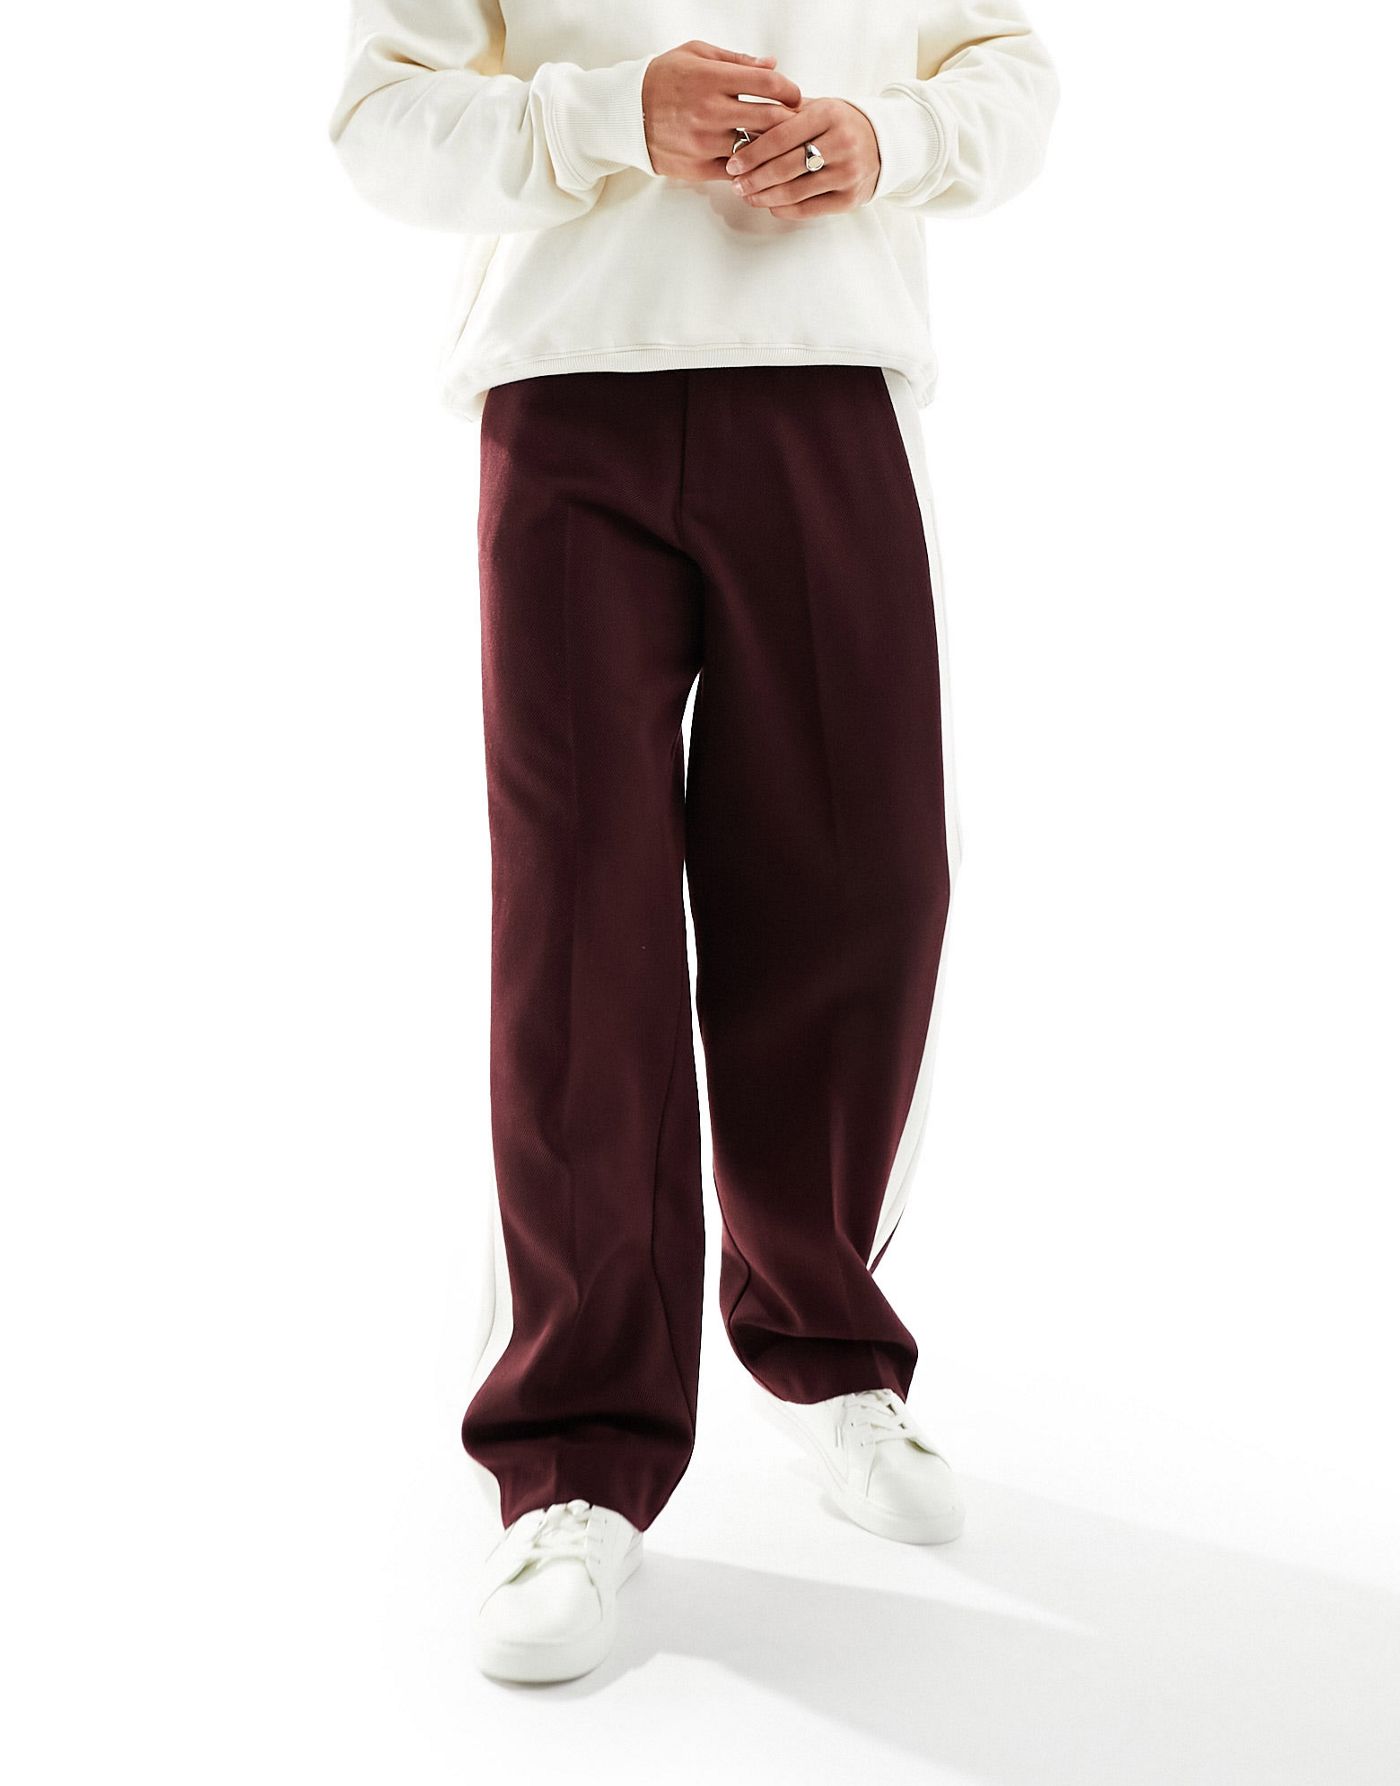 ASOS DESIGN smart wide wool mix leg trousers with side stripe in burgundy twill